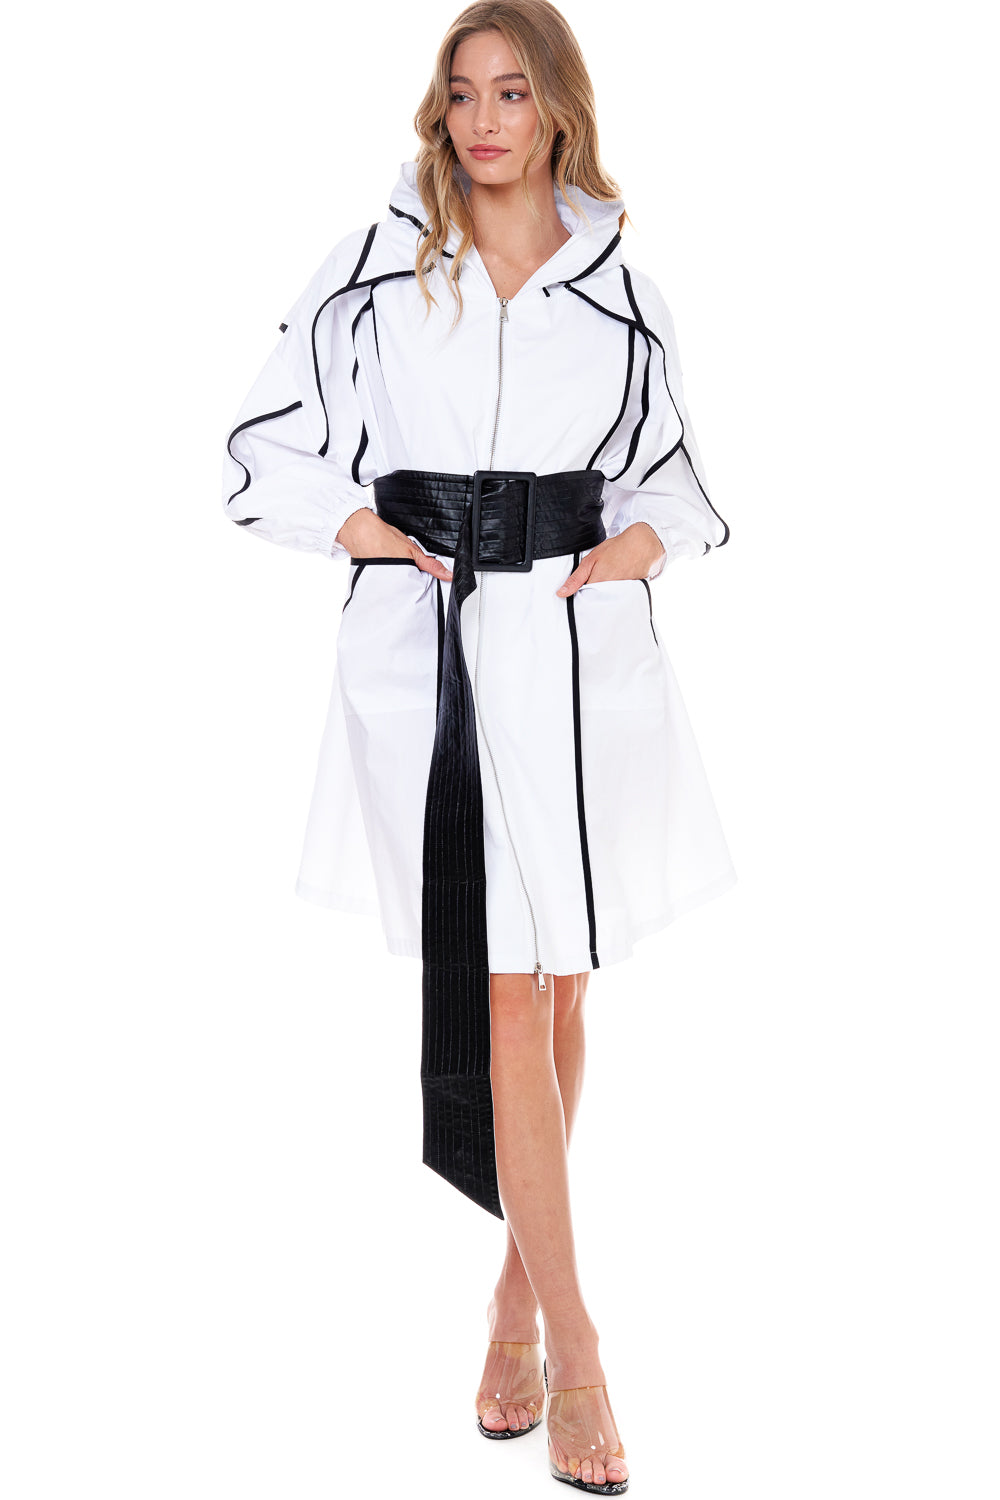 Black & White Piping Coat Dress with Wide Belt